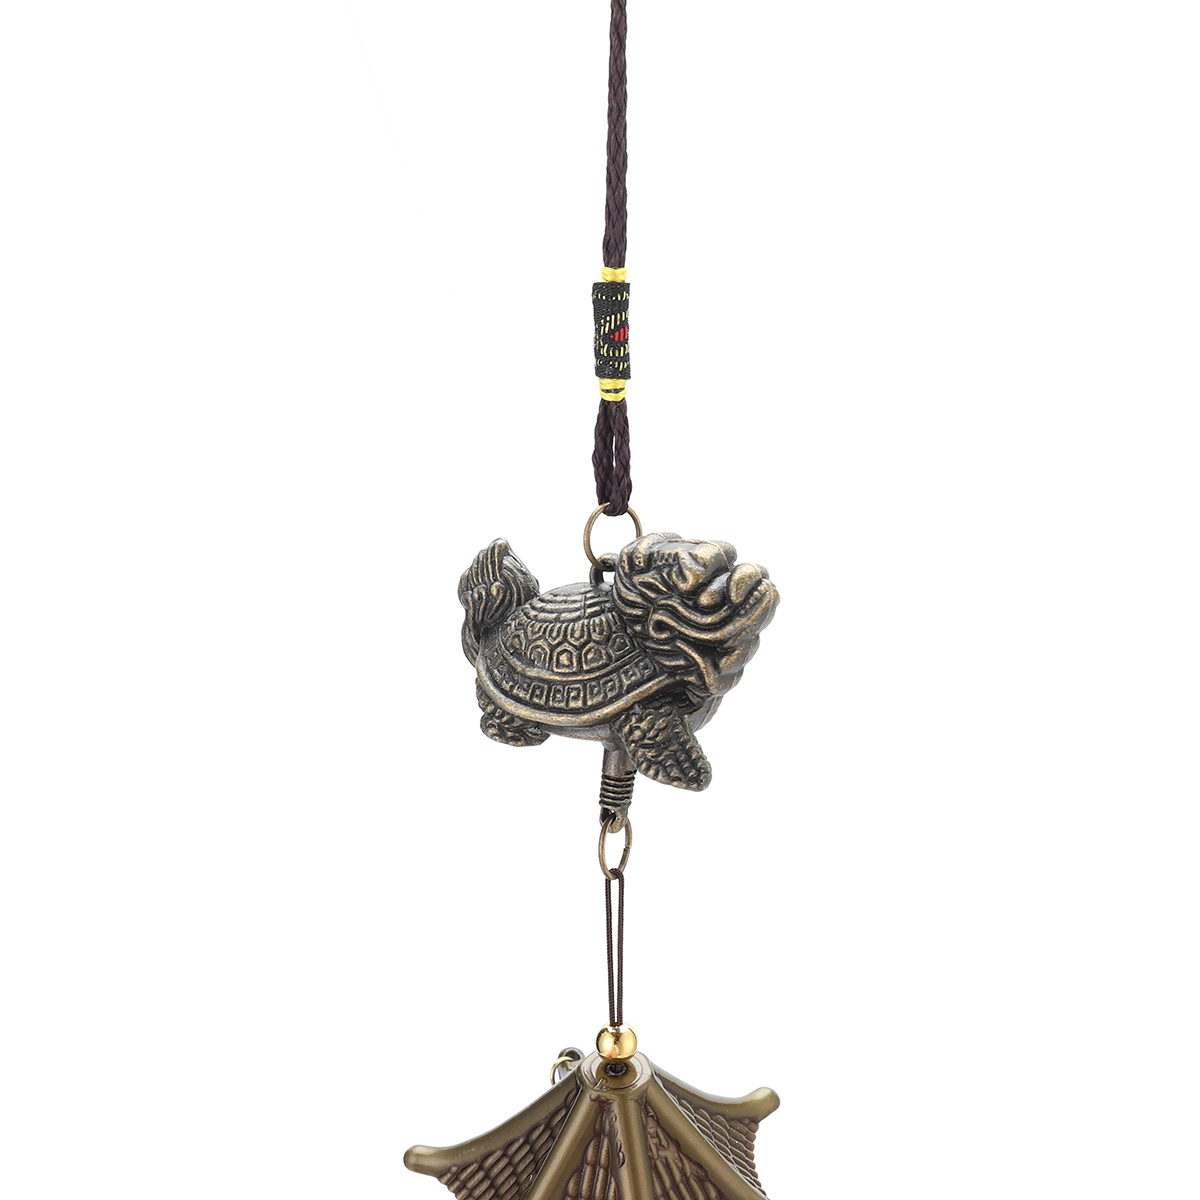 Copper-Lucky-Feng-Shui-Wind-Chime-Hanging-Bell-Jingle-Doorative-Pendant-Charm-1745703-8